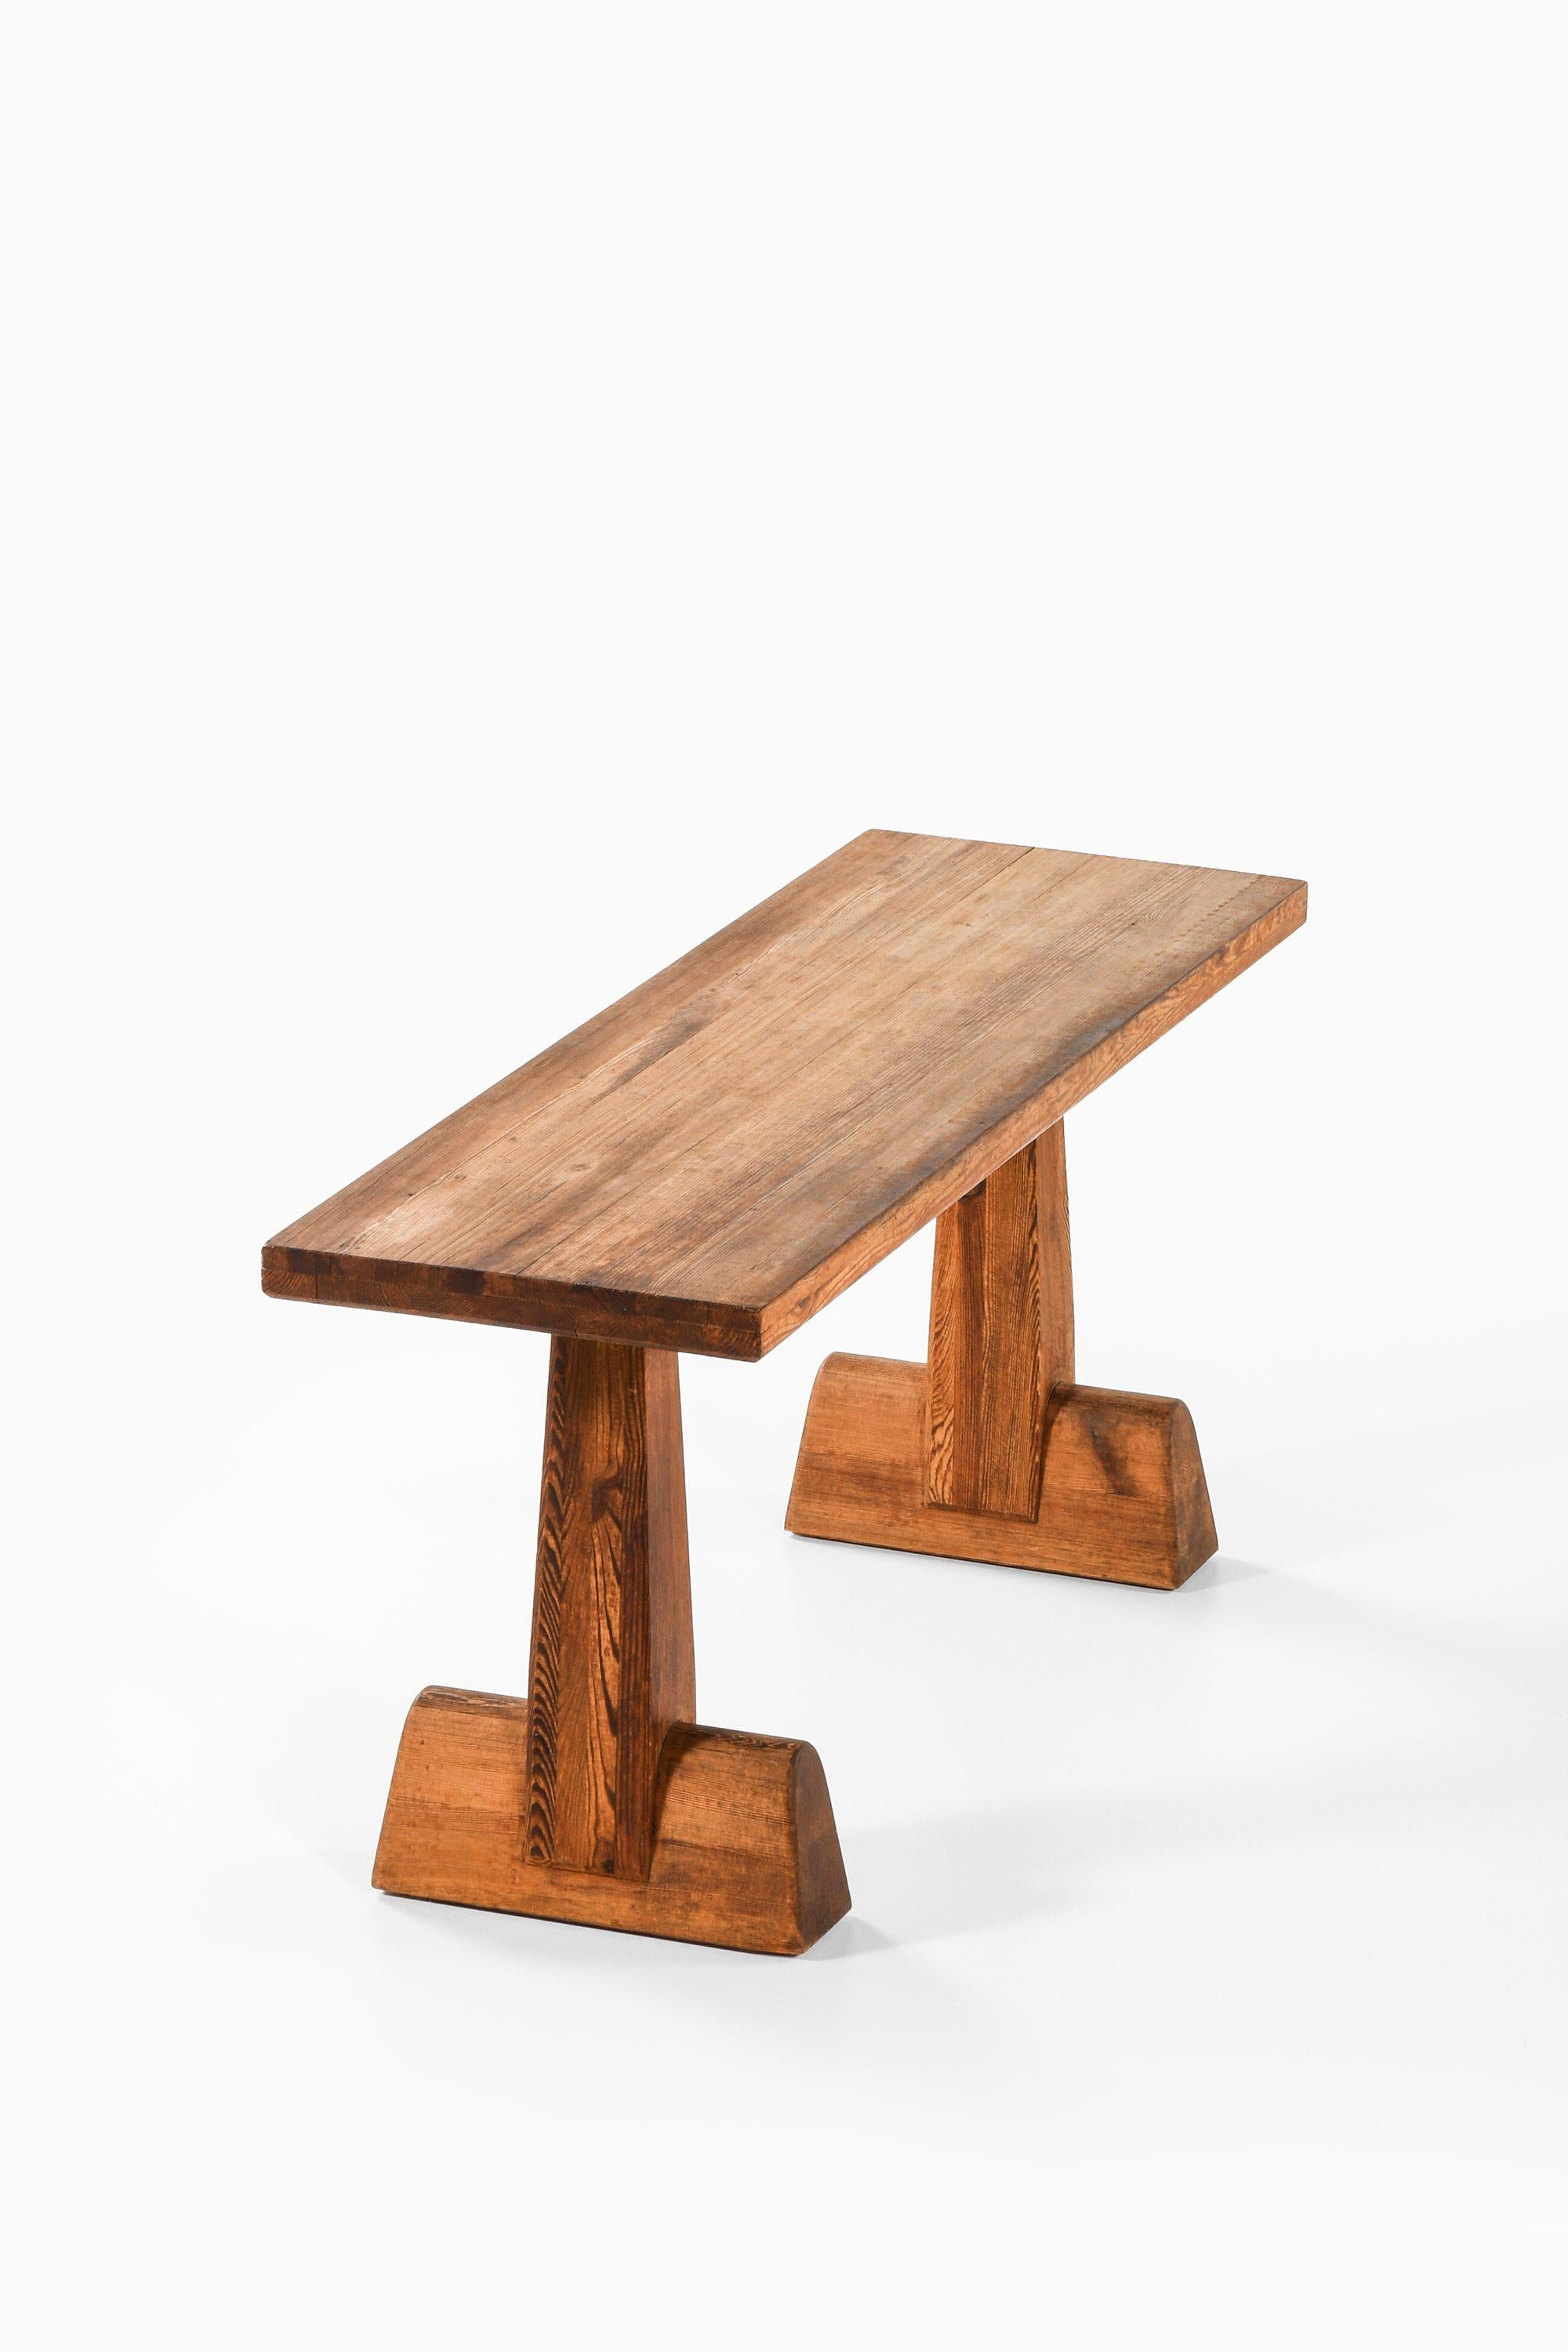 Swedish Library / Console Table in Acid-Stained Pine by Axel Einar Hjorth, 1932 For Sale